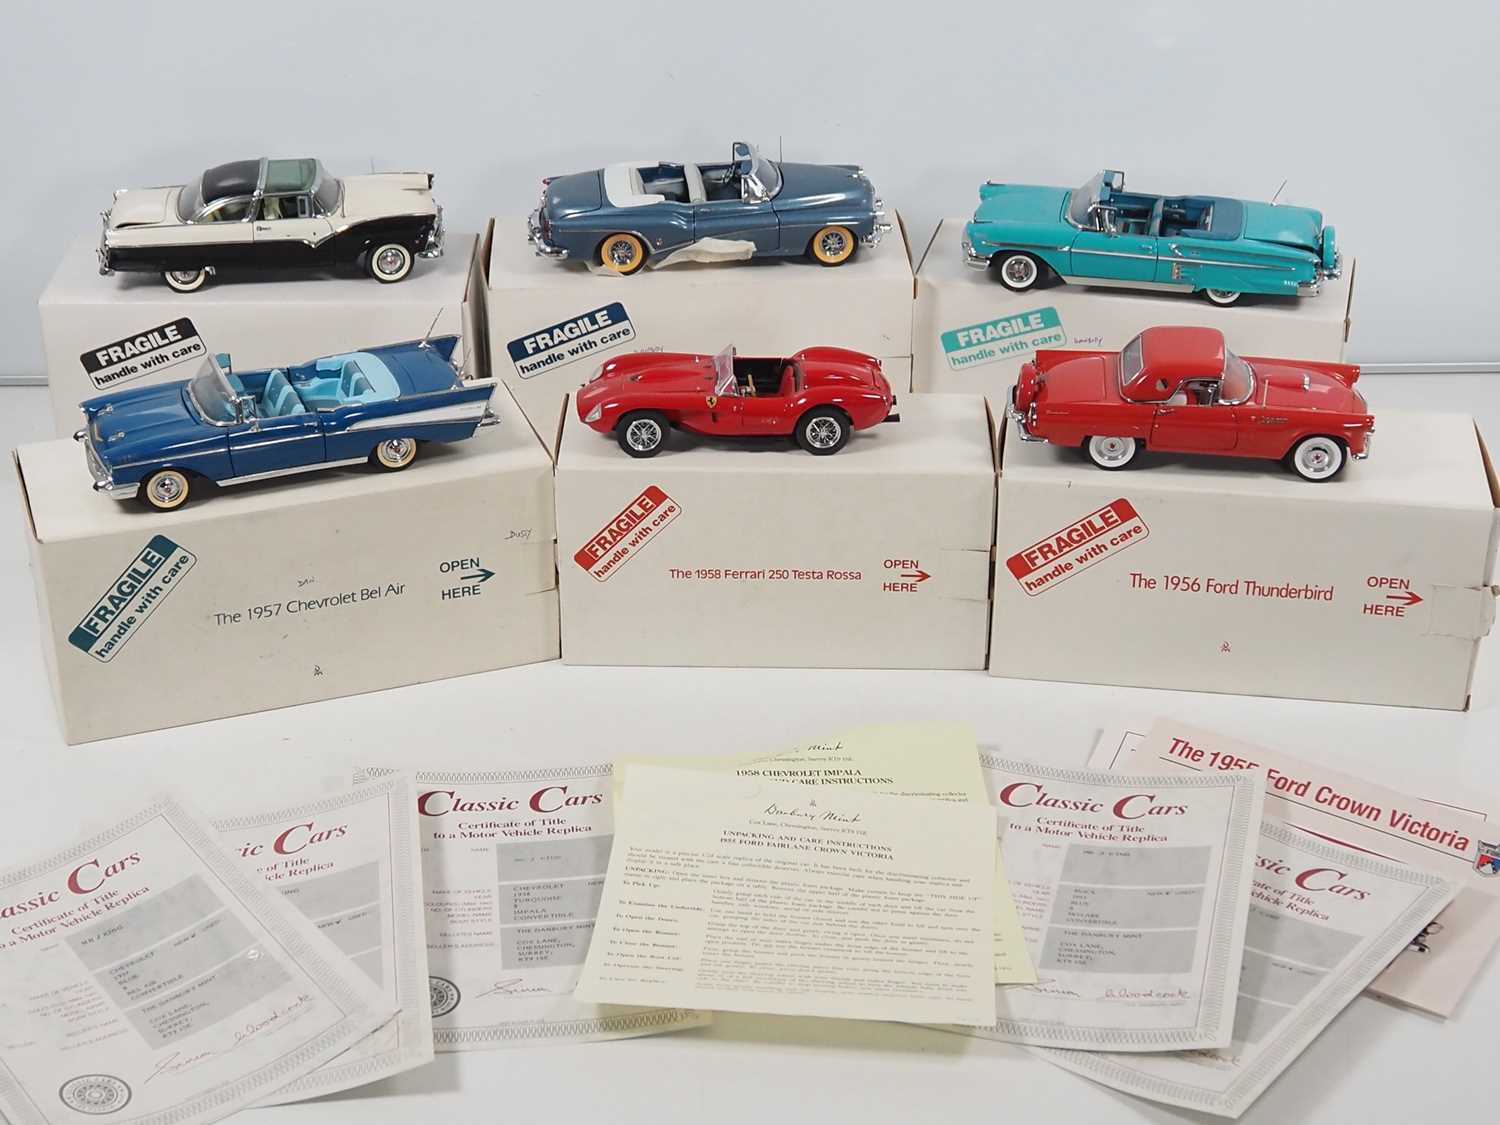 A group of 1:24 scale DANBURY MINT diecast cars to include a 1957 Chevrolet Bel Air and a Ferrari